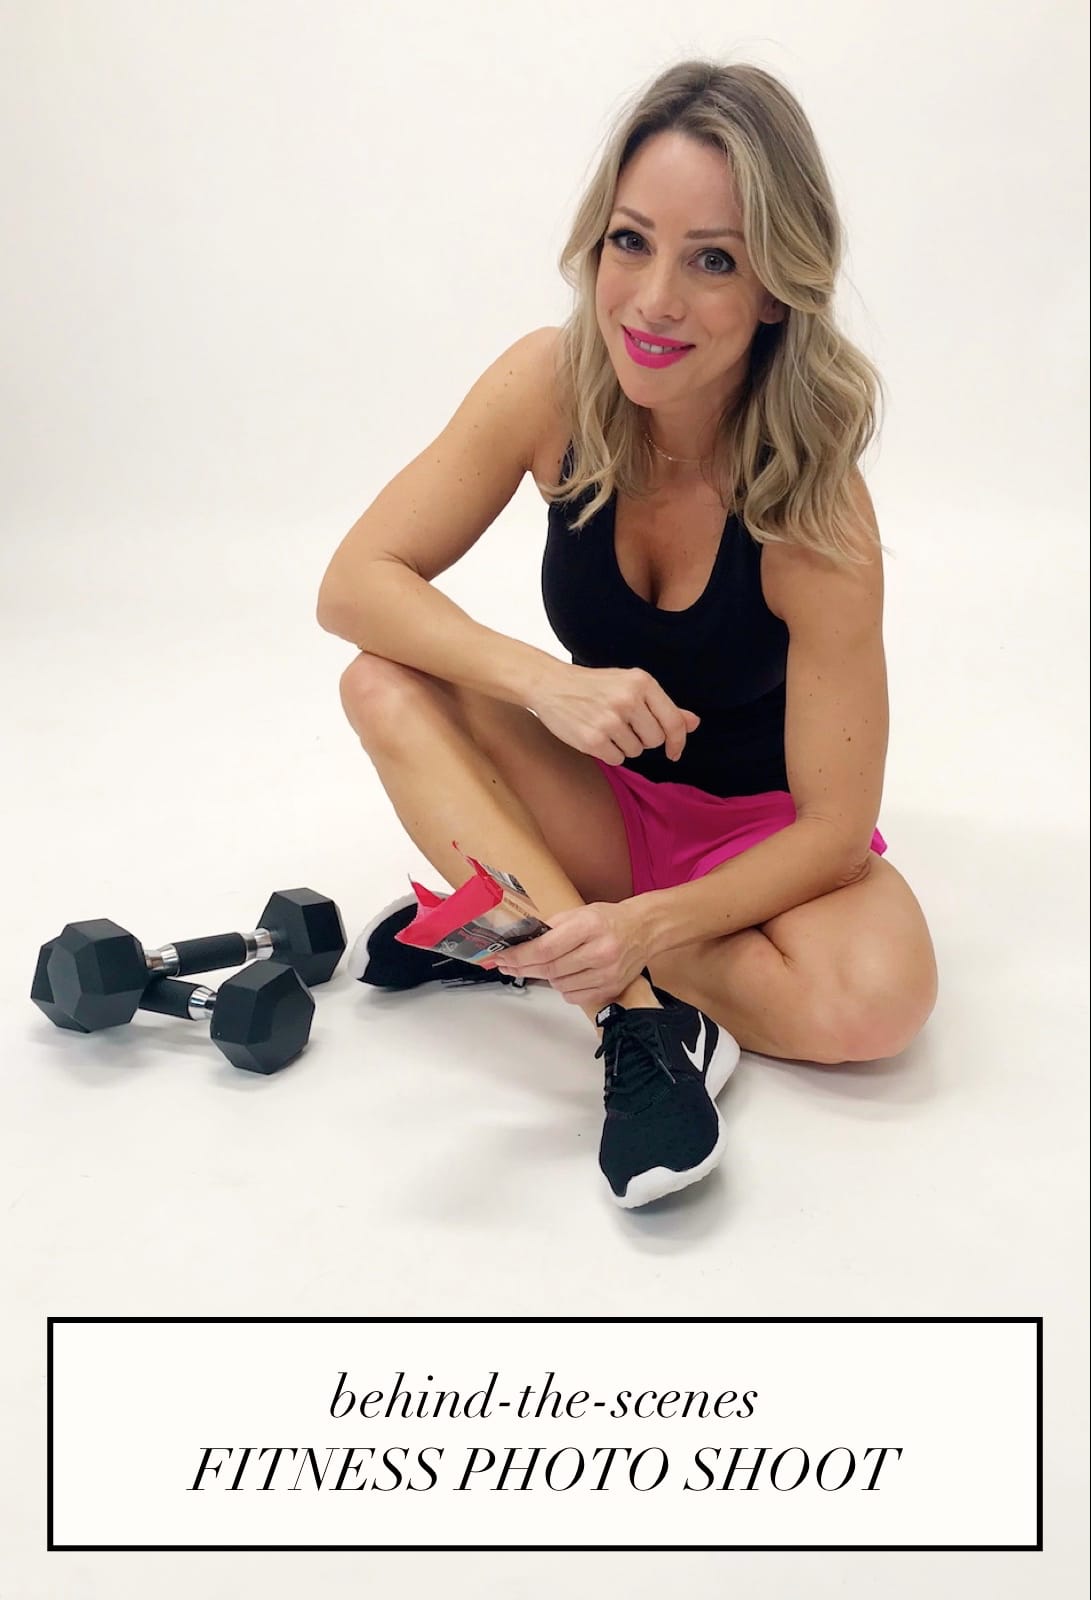 Behind the scenes fitness photo shoot